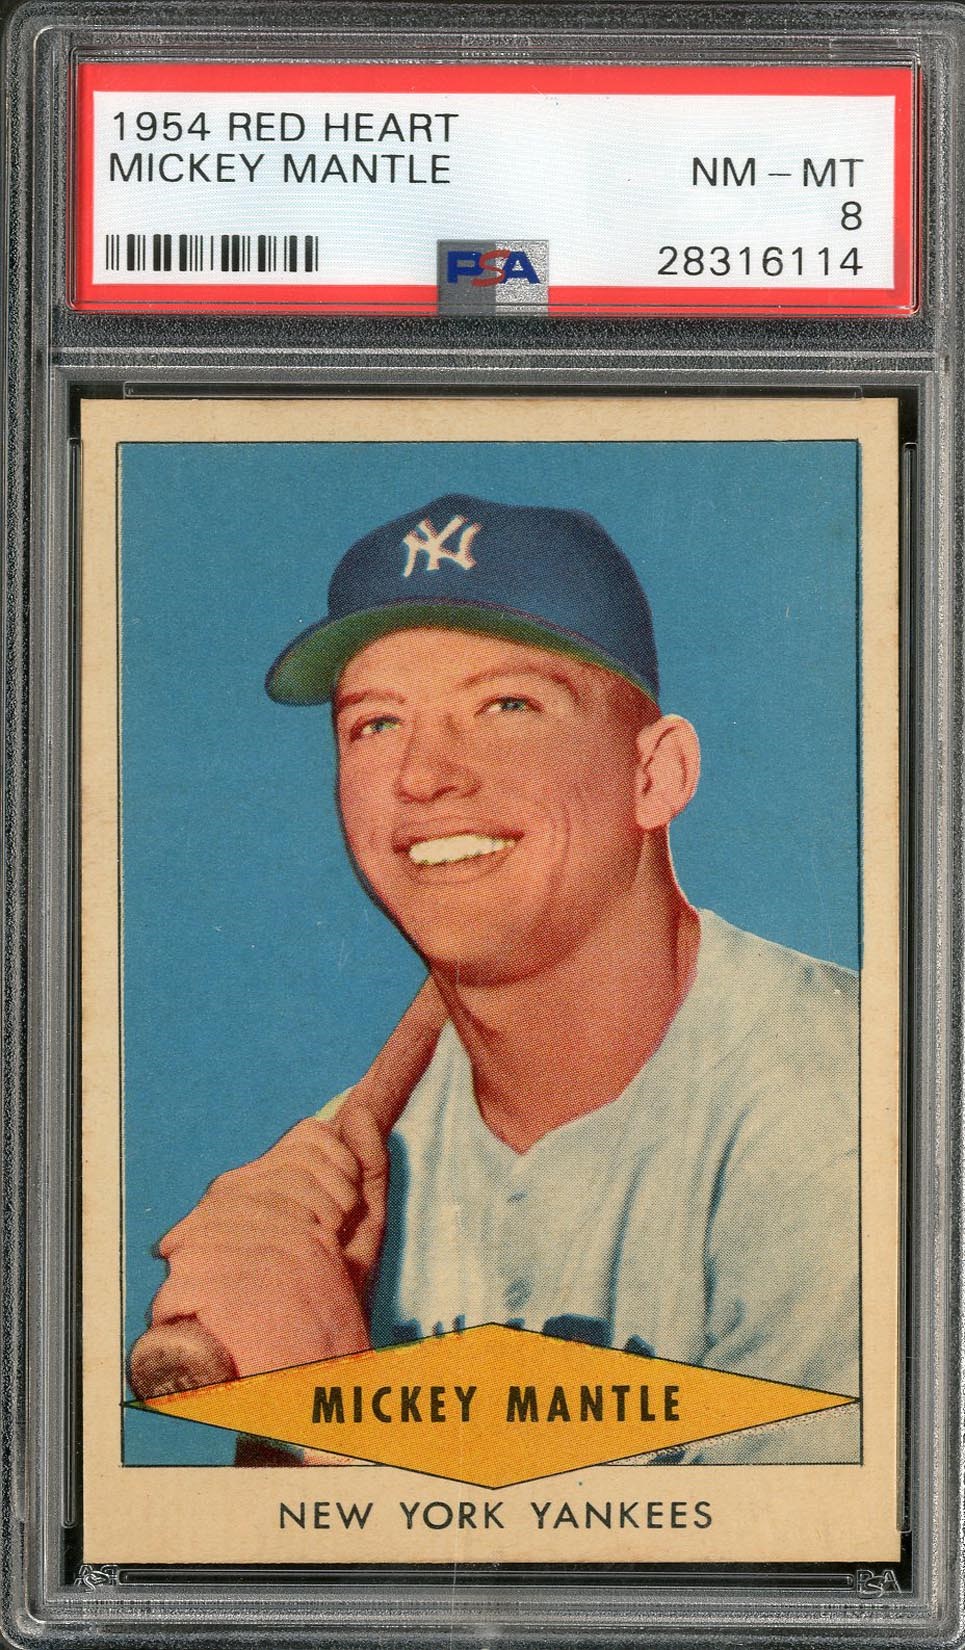 - 1954 Red Heart Mickey Mantle - PSA NM-MT 8